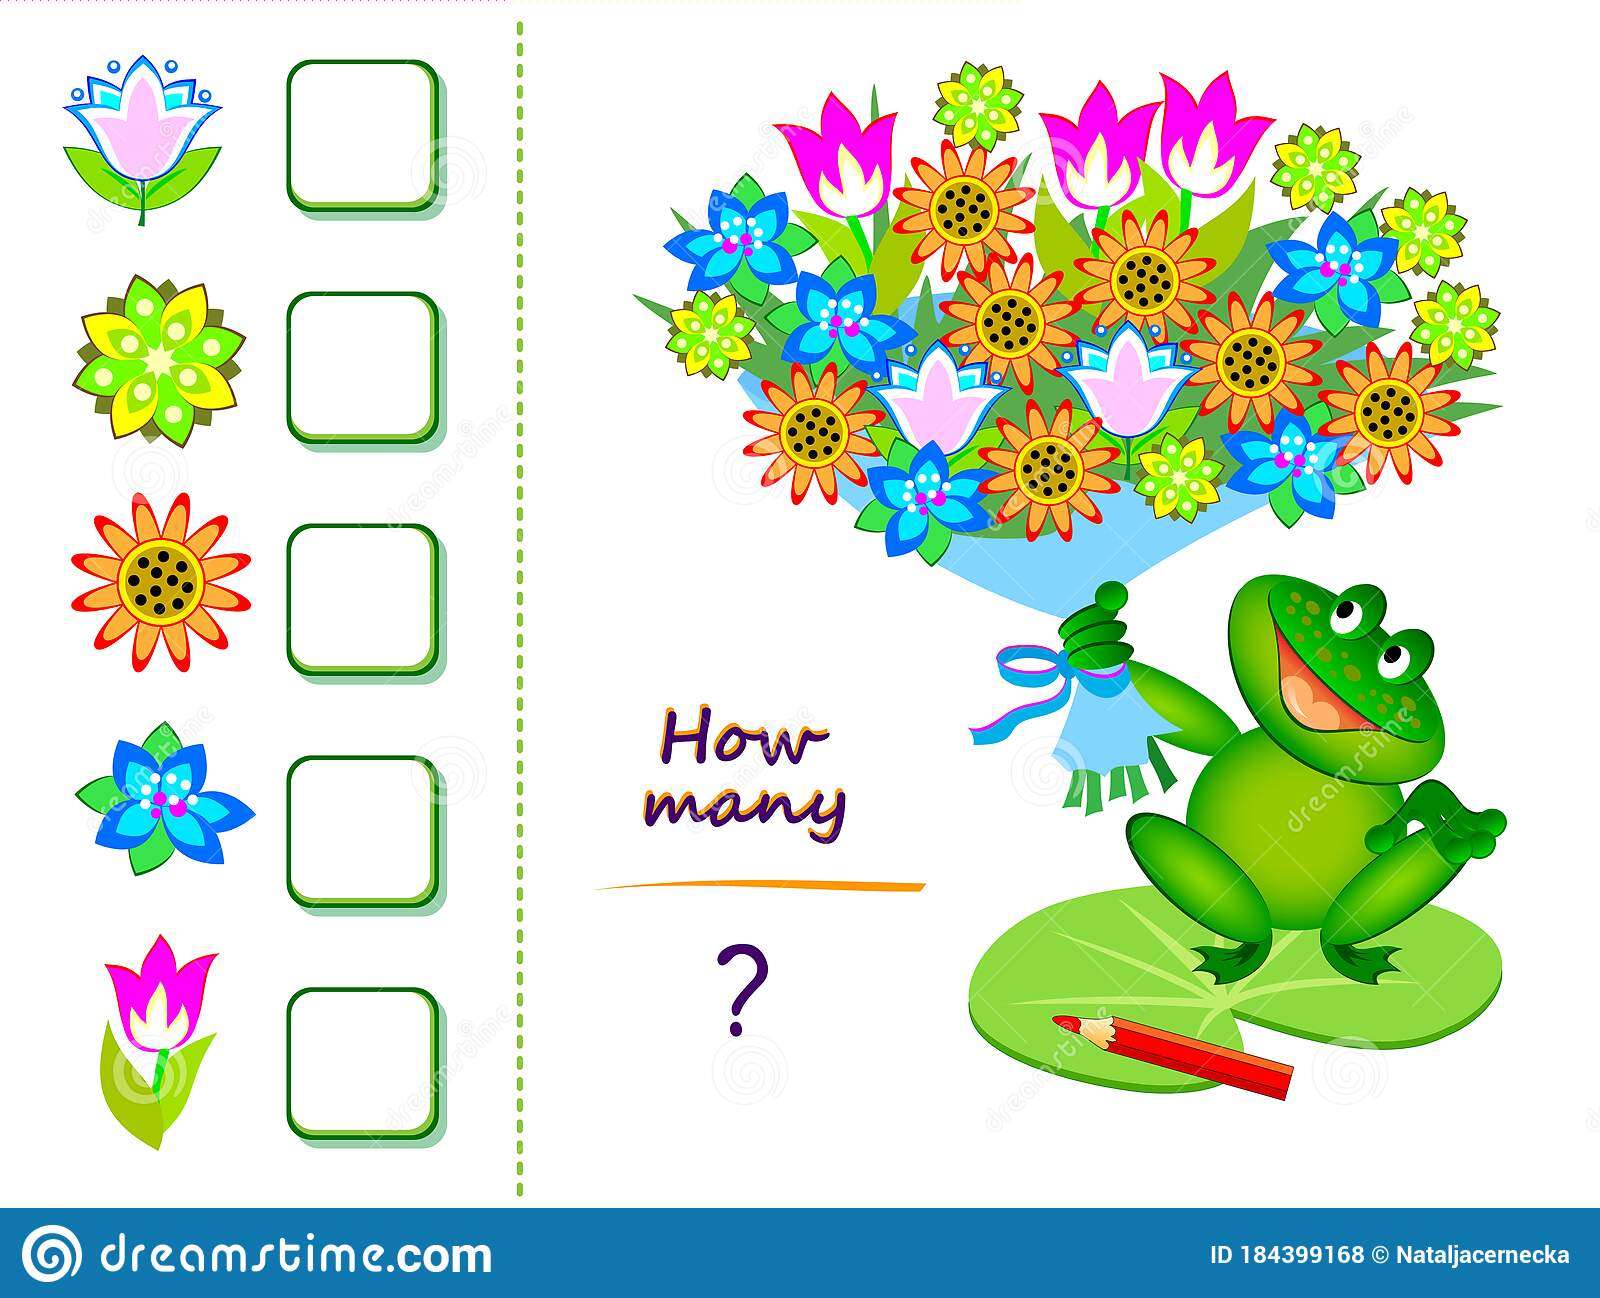 Math Education For Children. Count Quantity Of Flowers In Bouquet And ...